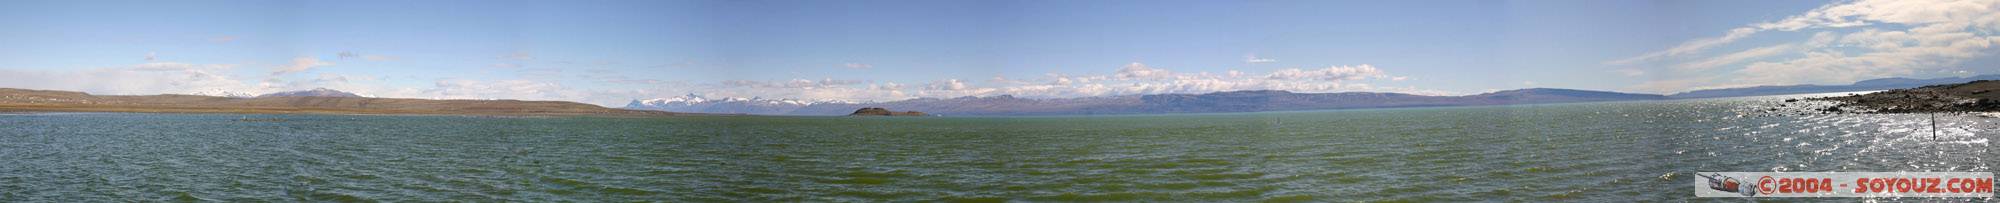 Panoramique du lac Argentino / Panoramic view of the Argentino Lake
